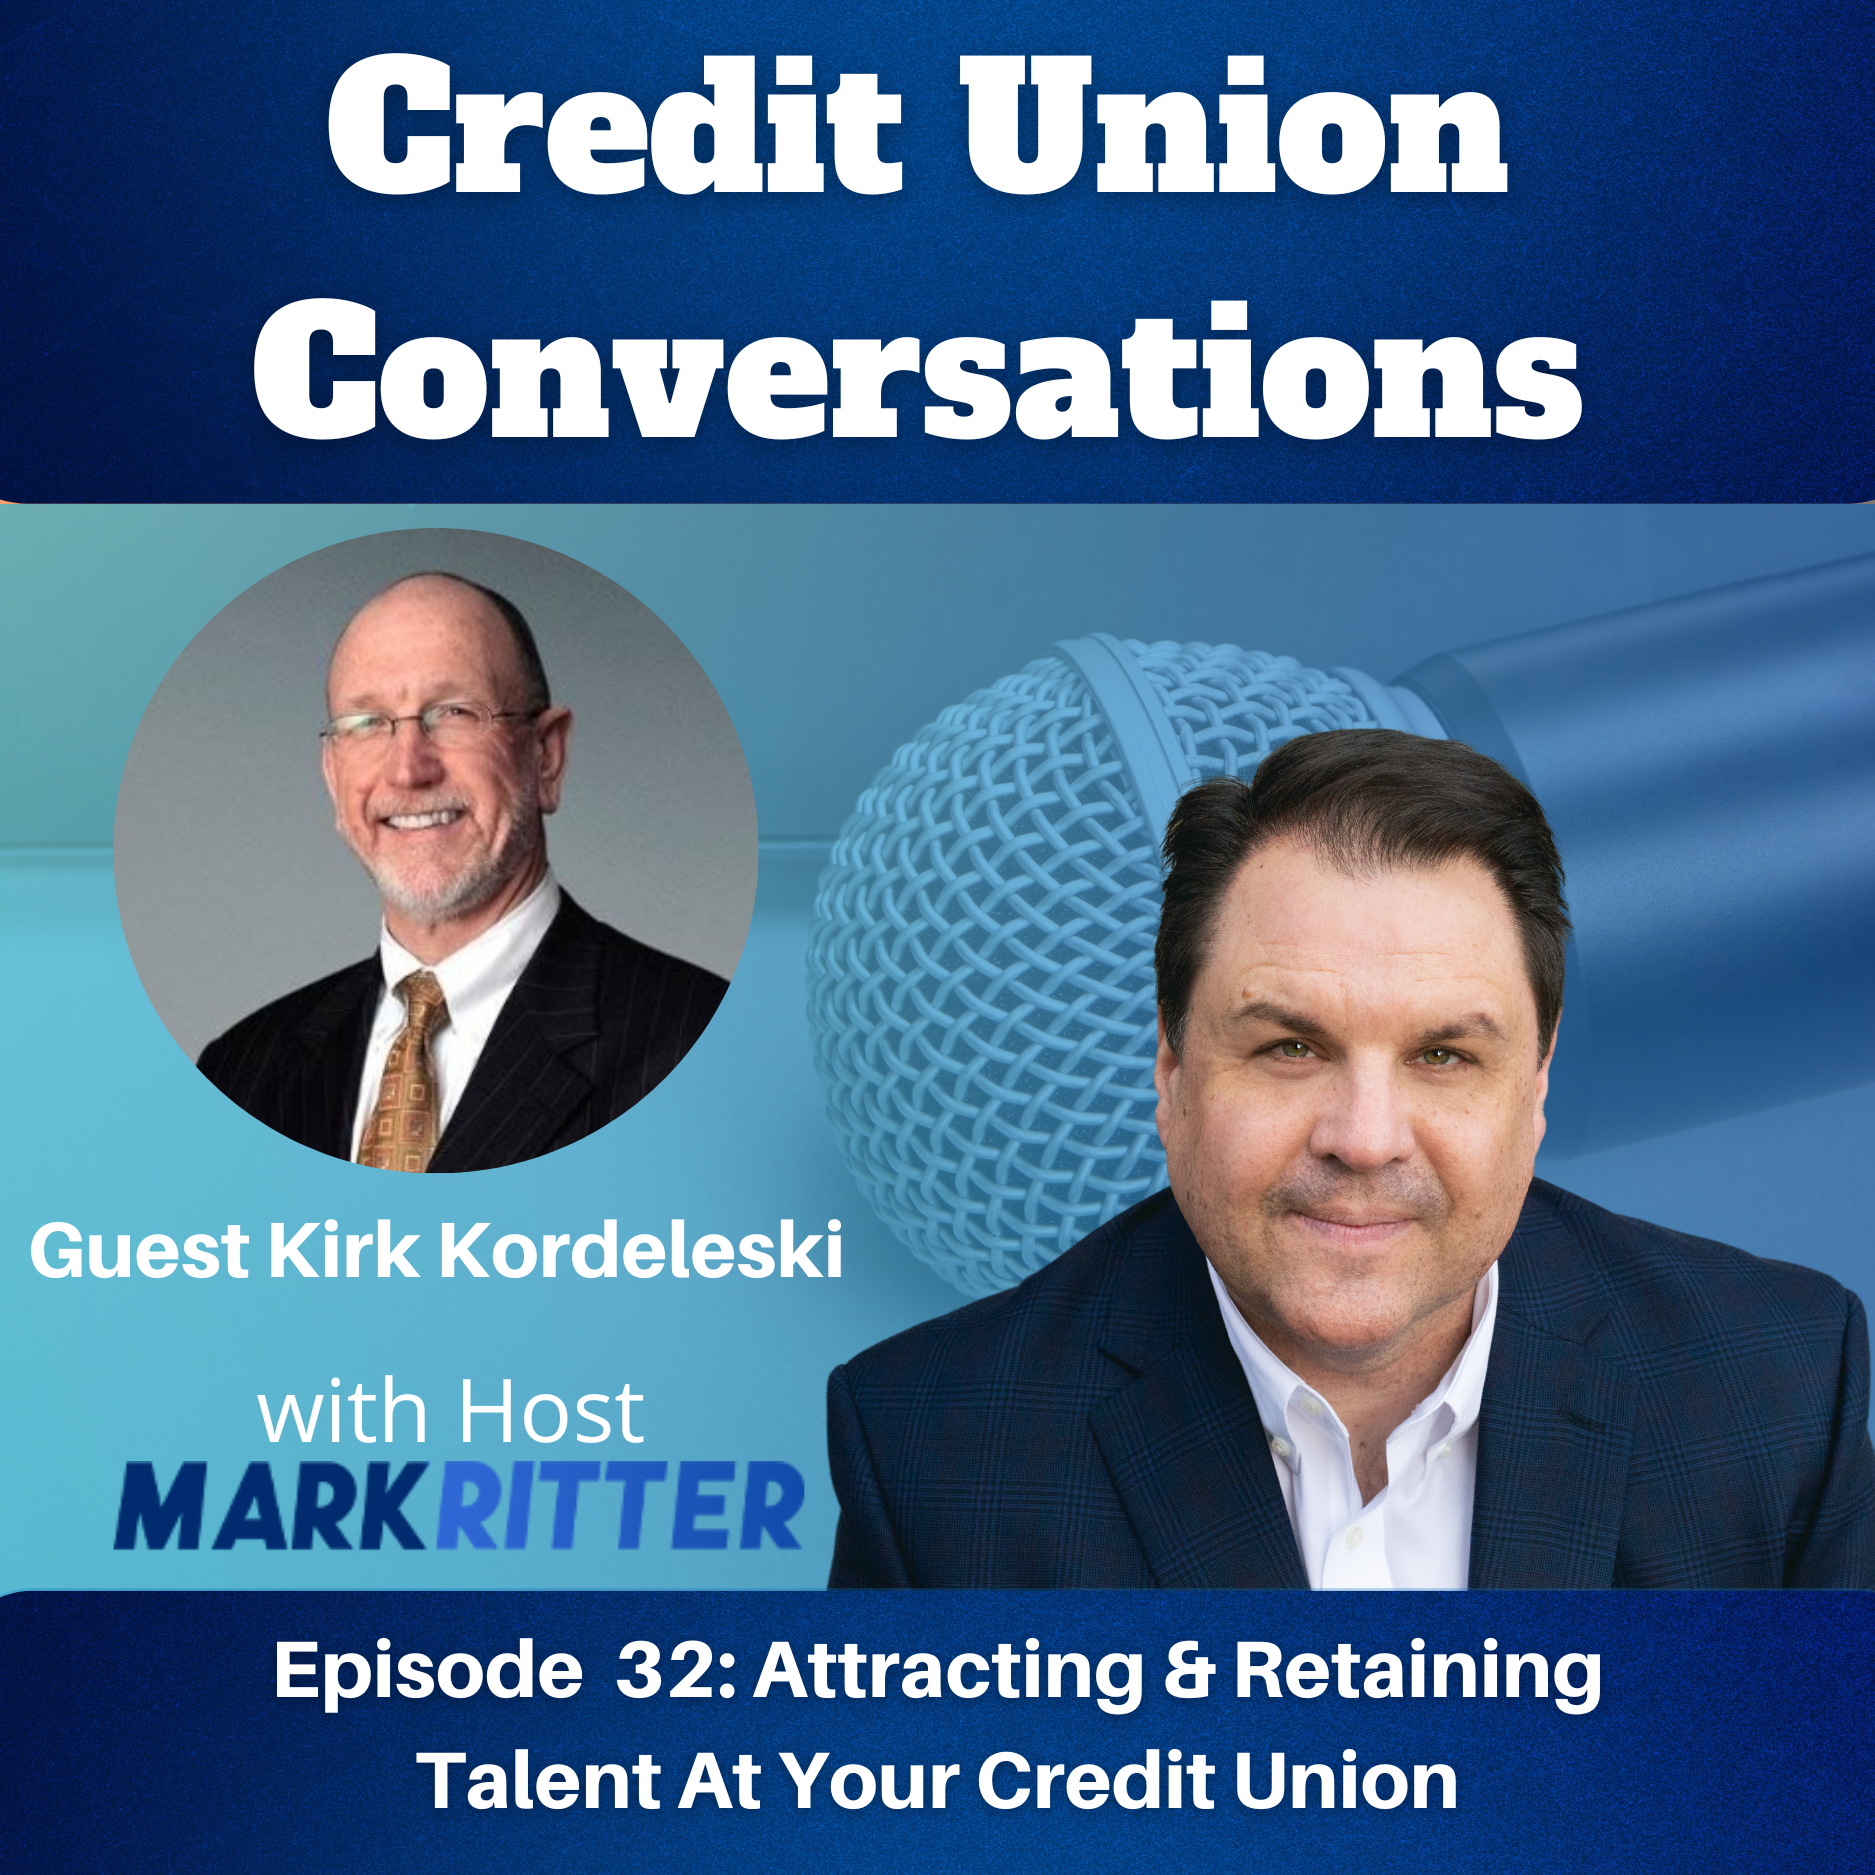 Attracting & Retaining Talent At Your Credit Union